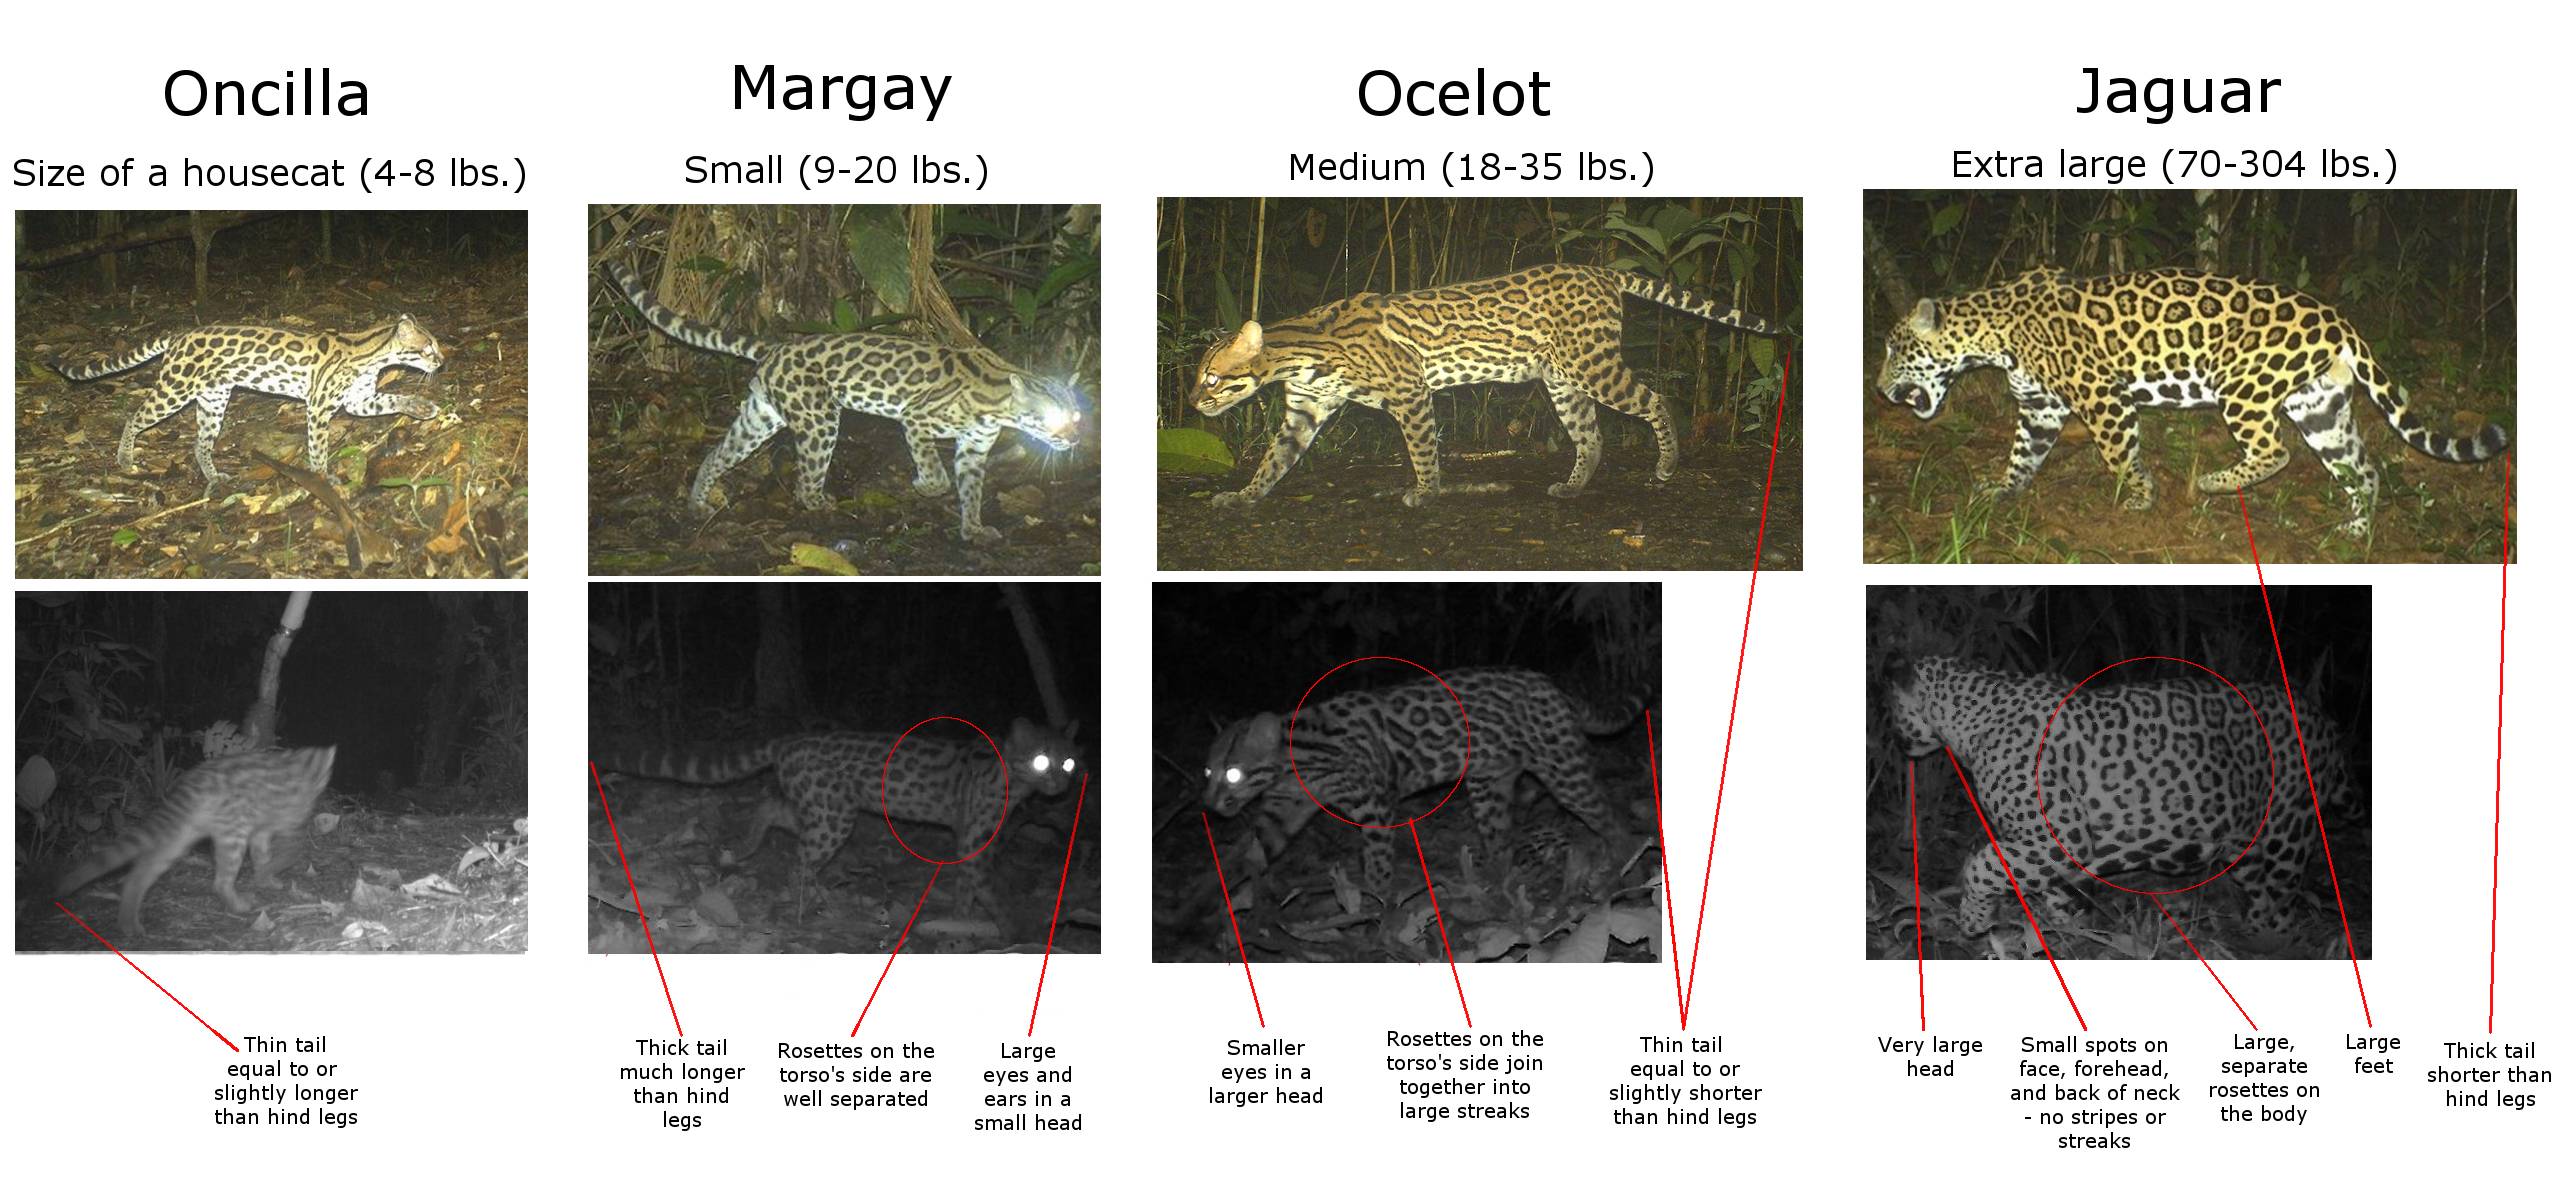 What is the difference between a margay and an ocelot?